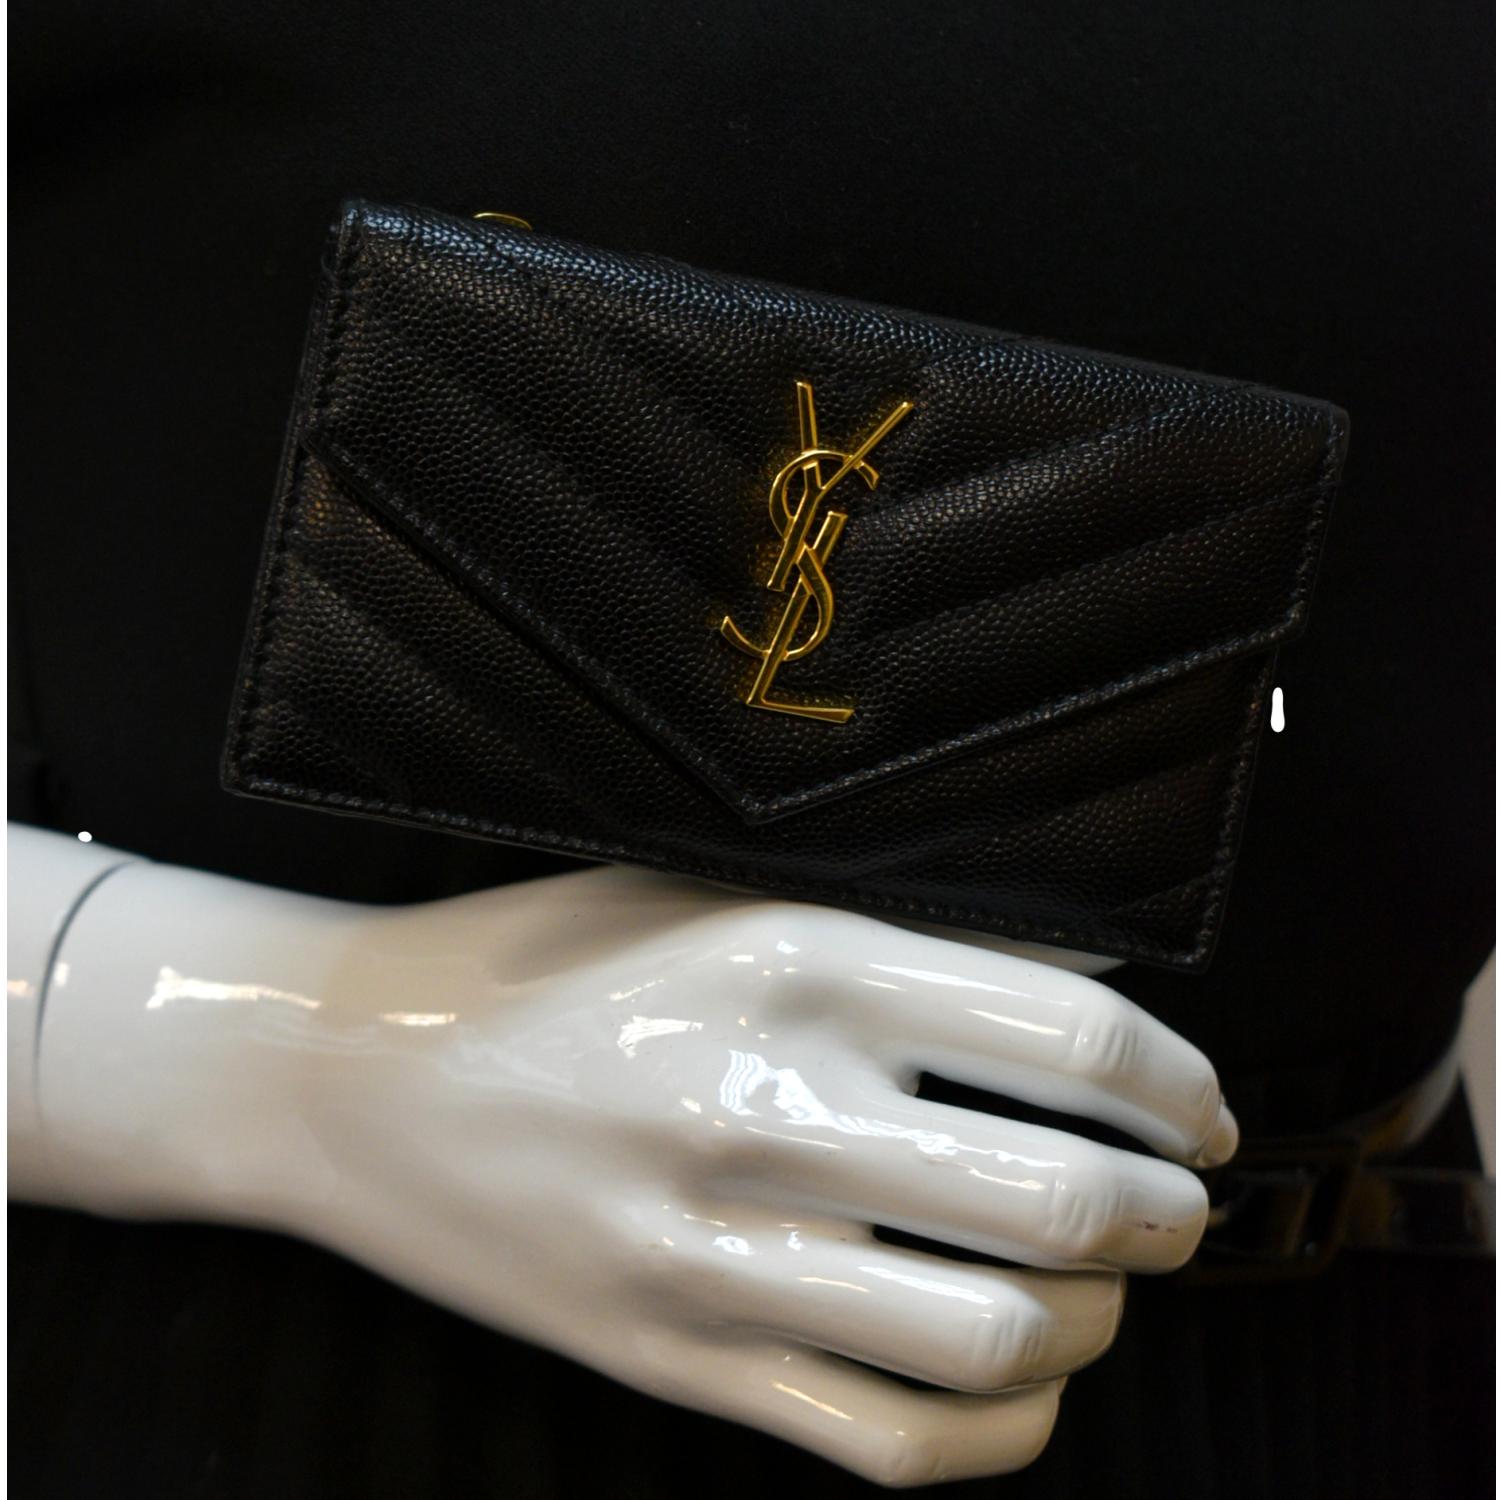 Review of the YSL Small Envelope Wallet!!! 